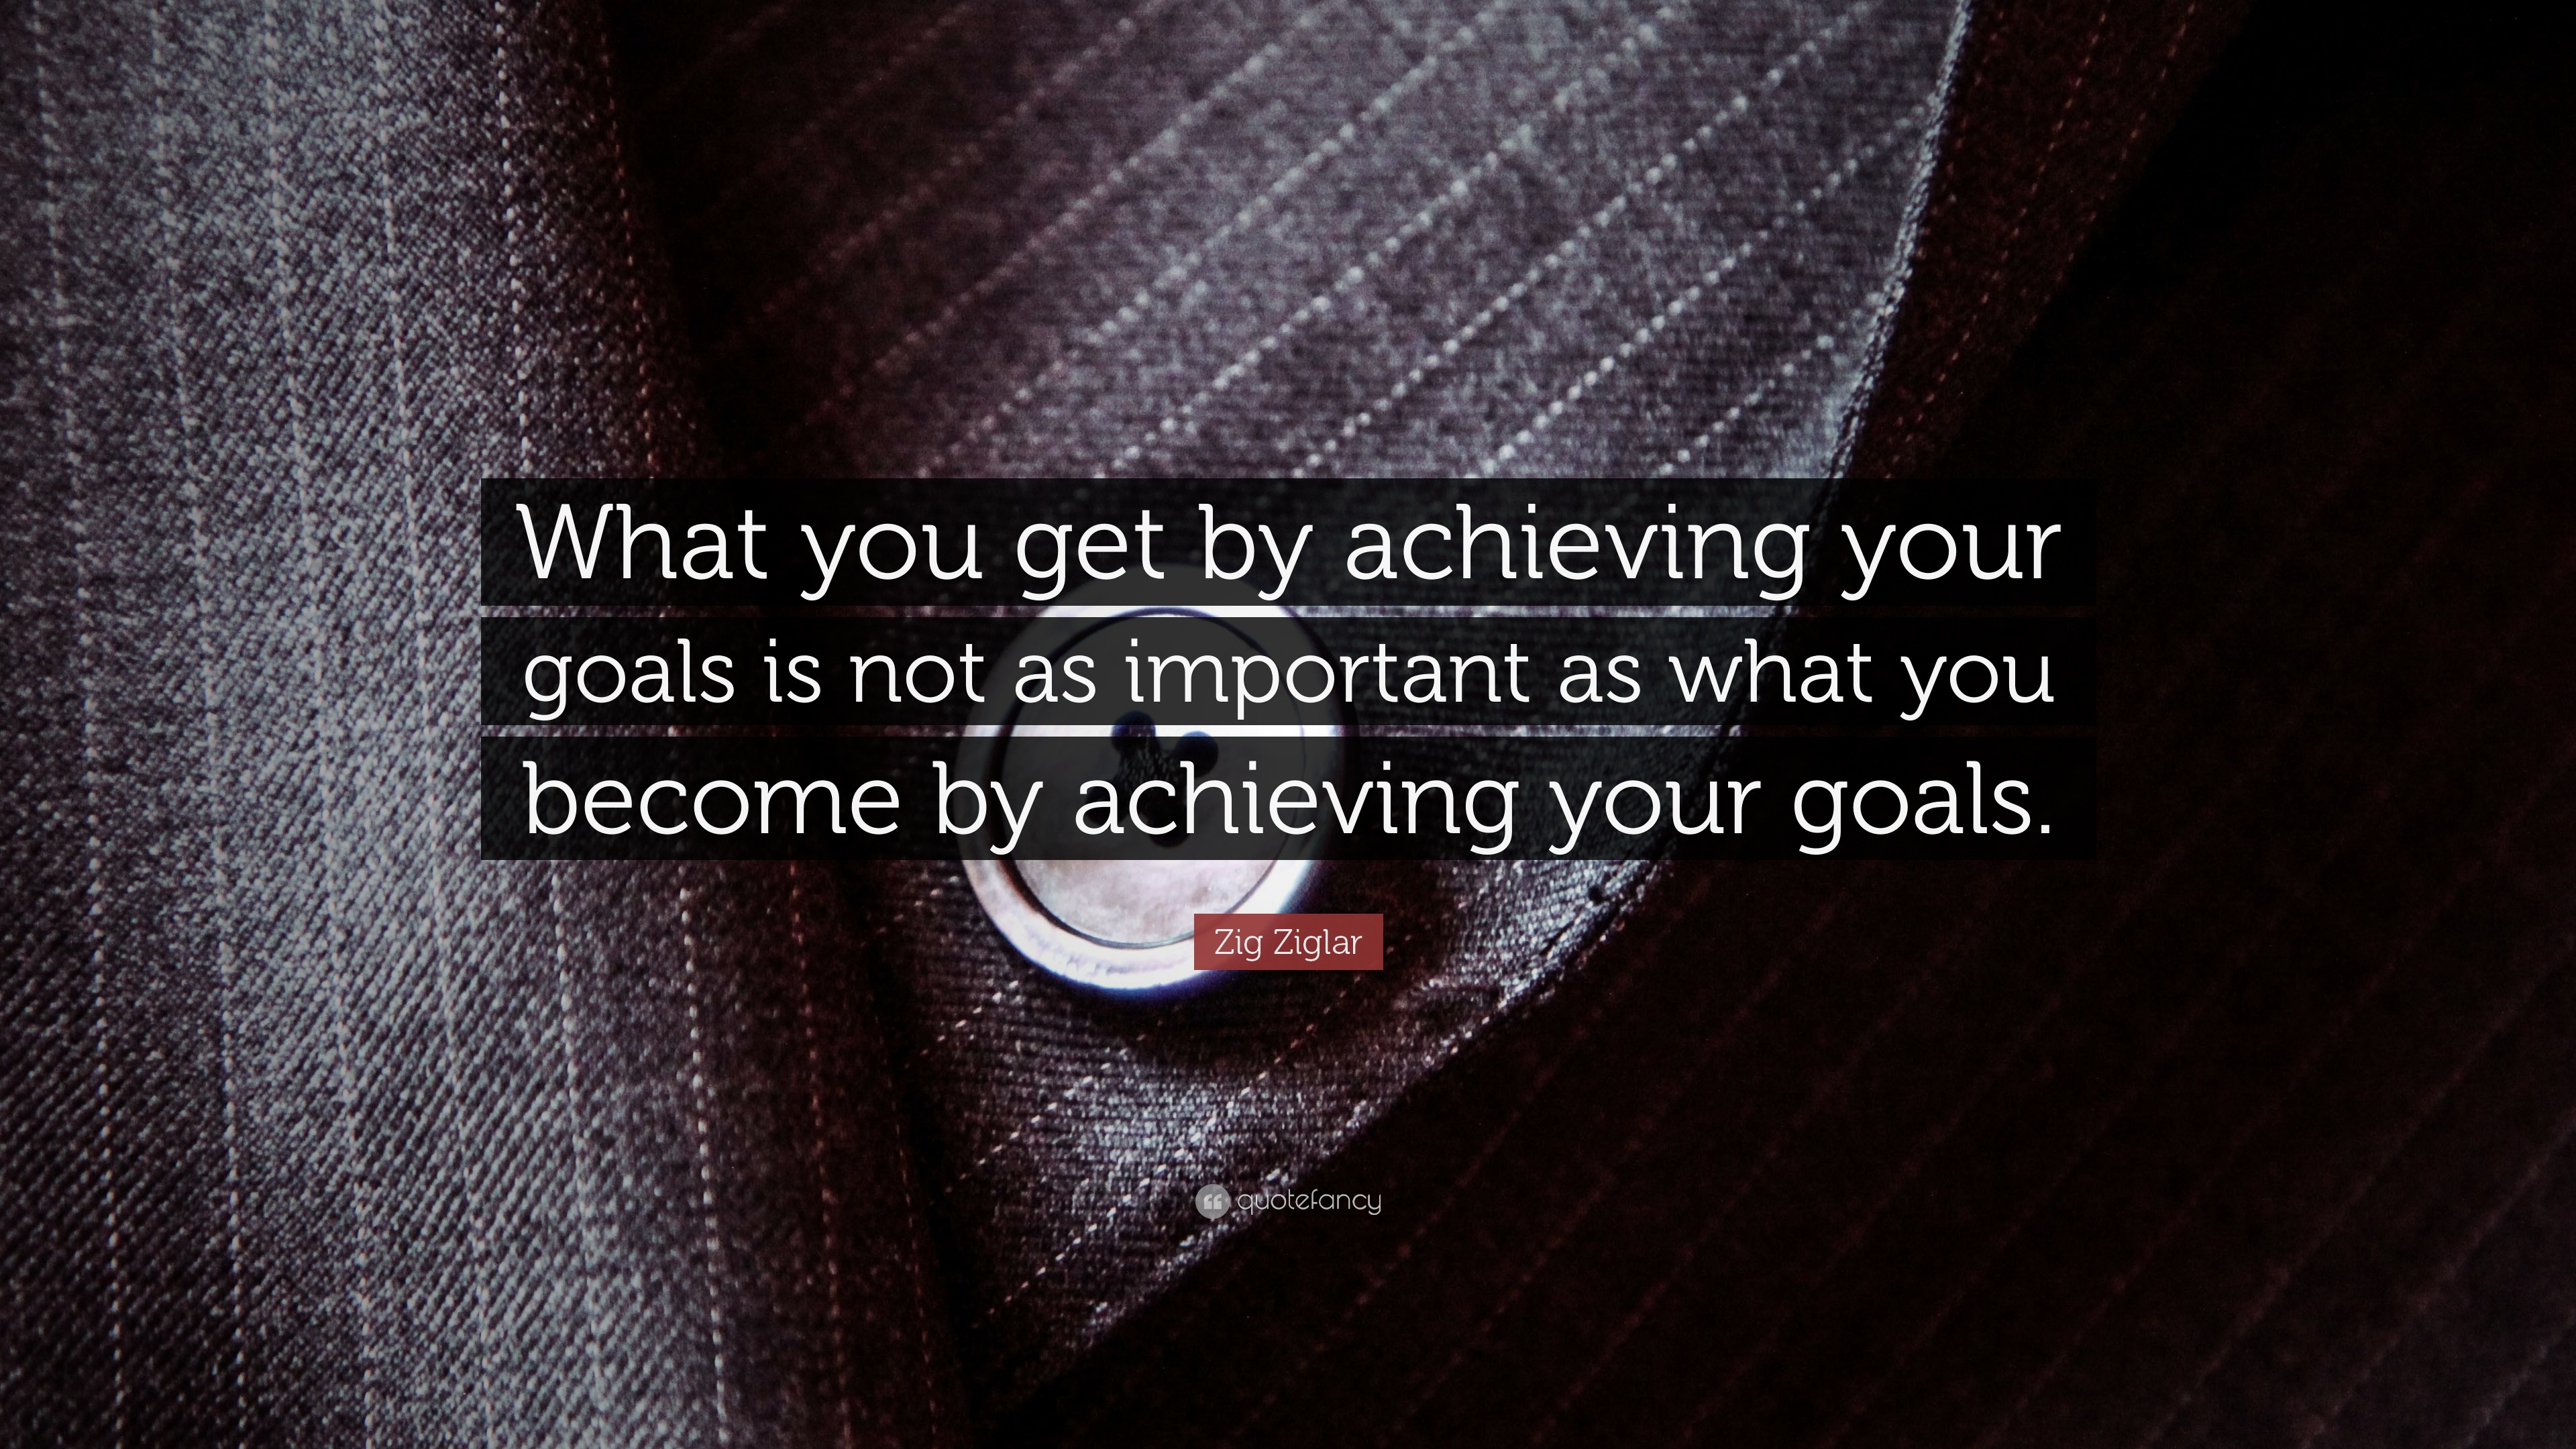 Zig Ziglar Quote: “What you get by achieving your goals is not as